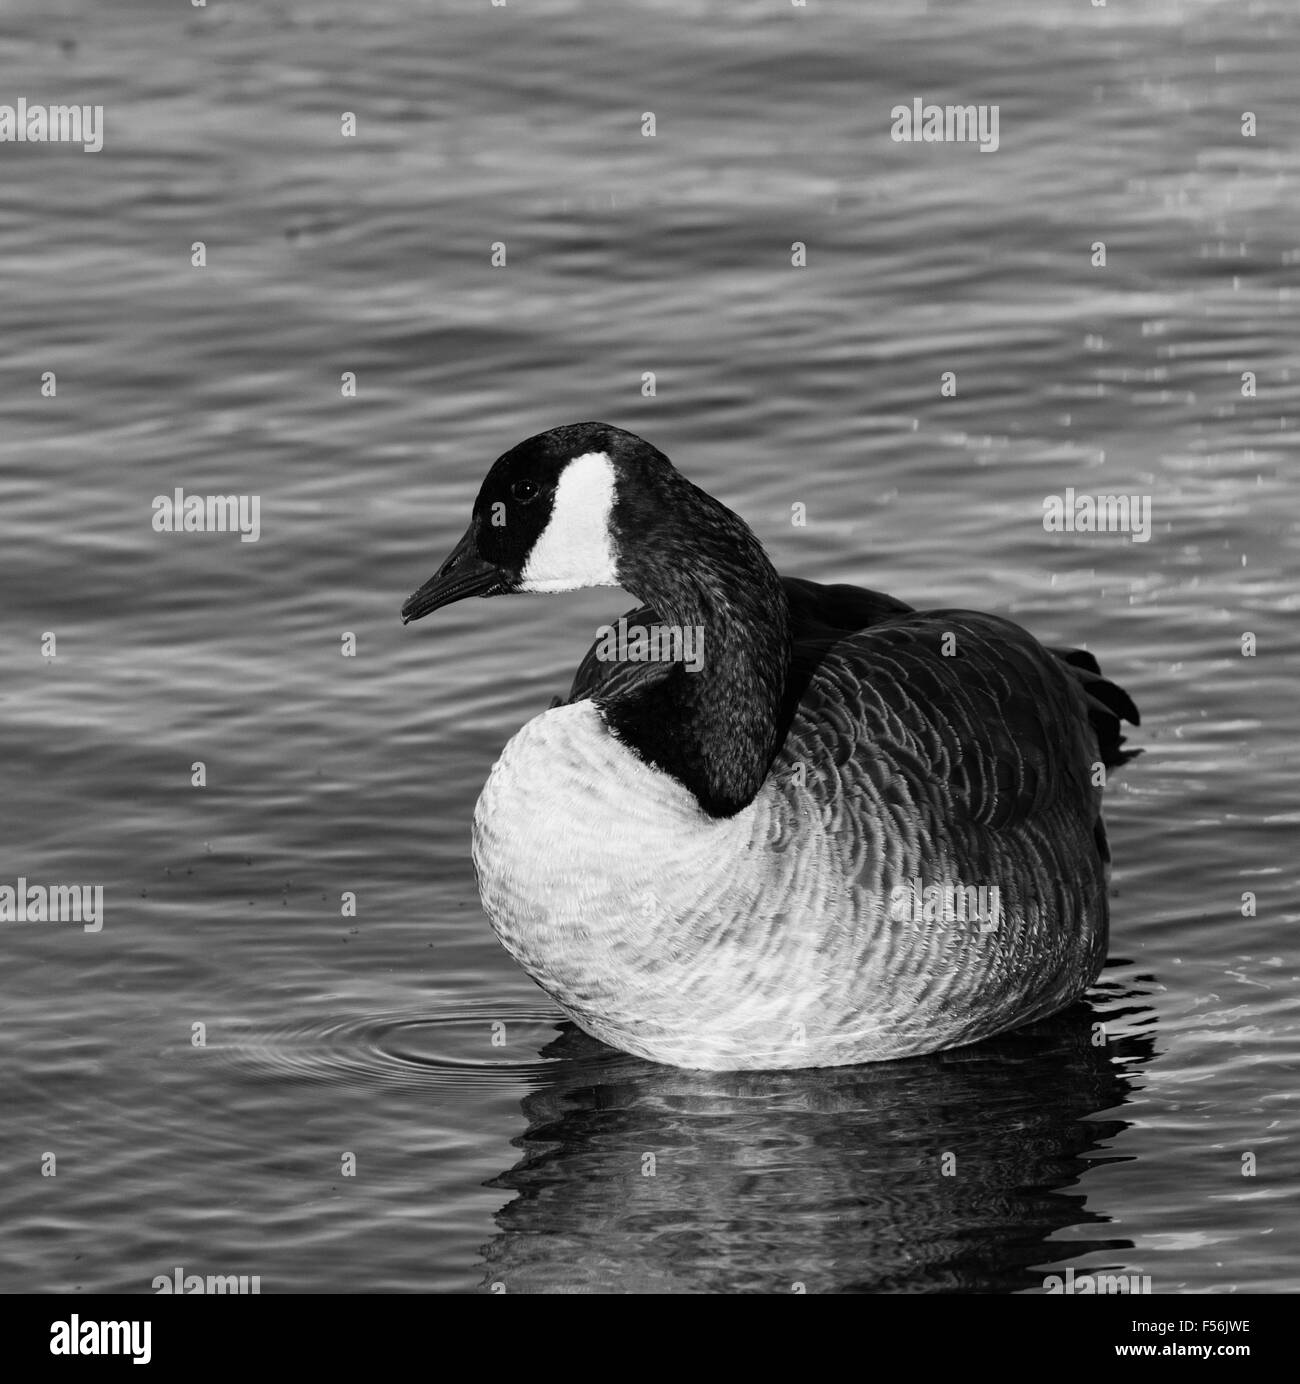 Beautiful black and white close-up of the Canada goose in the lake Stock Photo